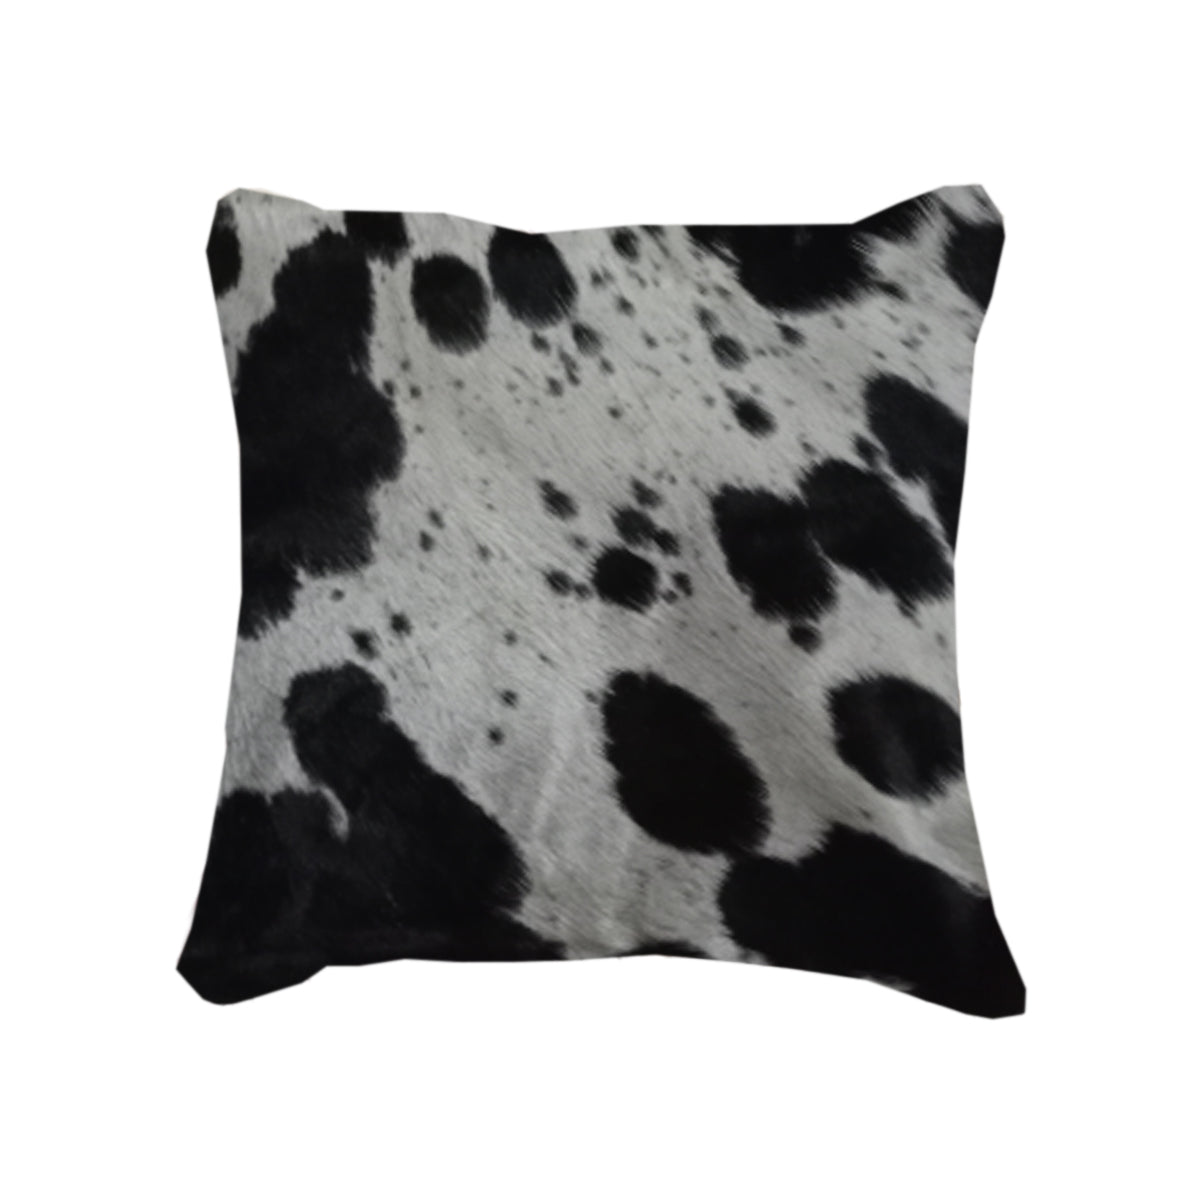 Cowhide Leather Black Cow Cushion Cover